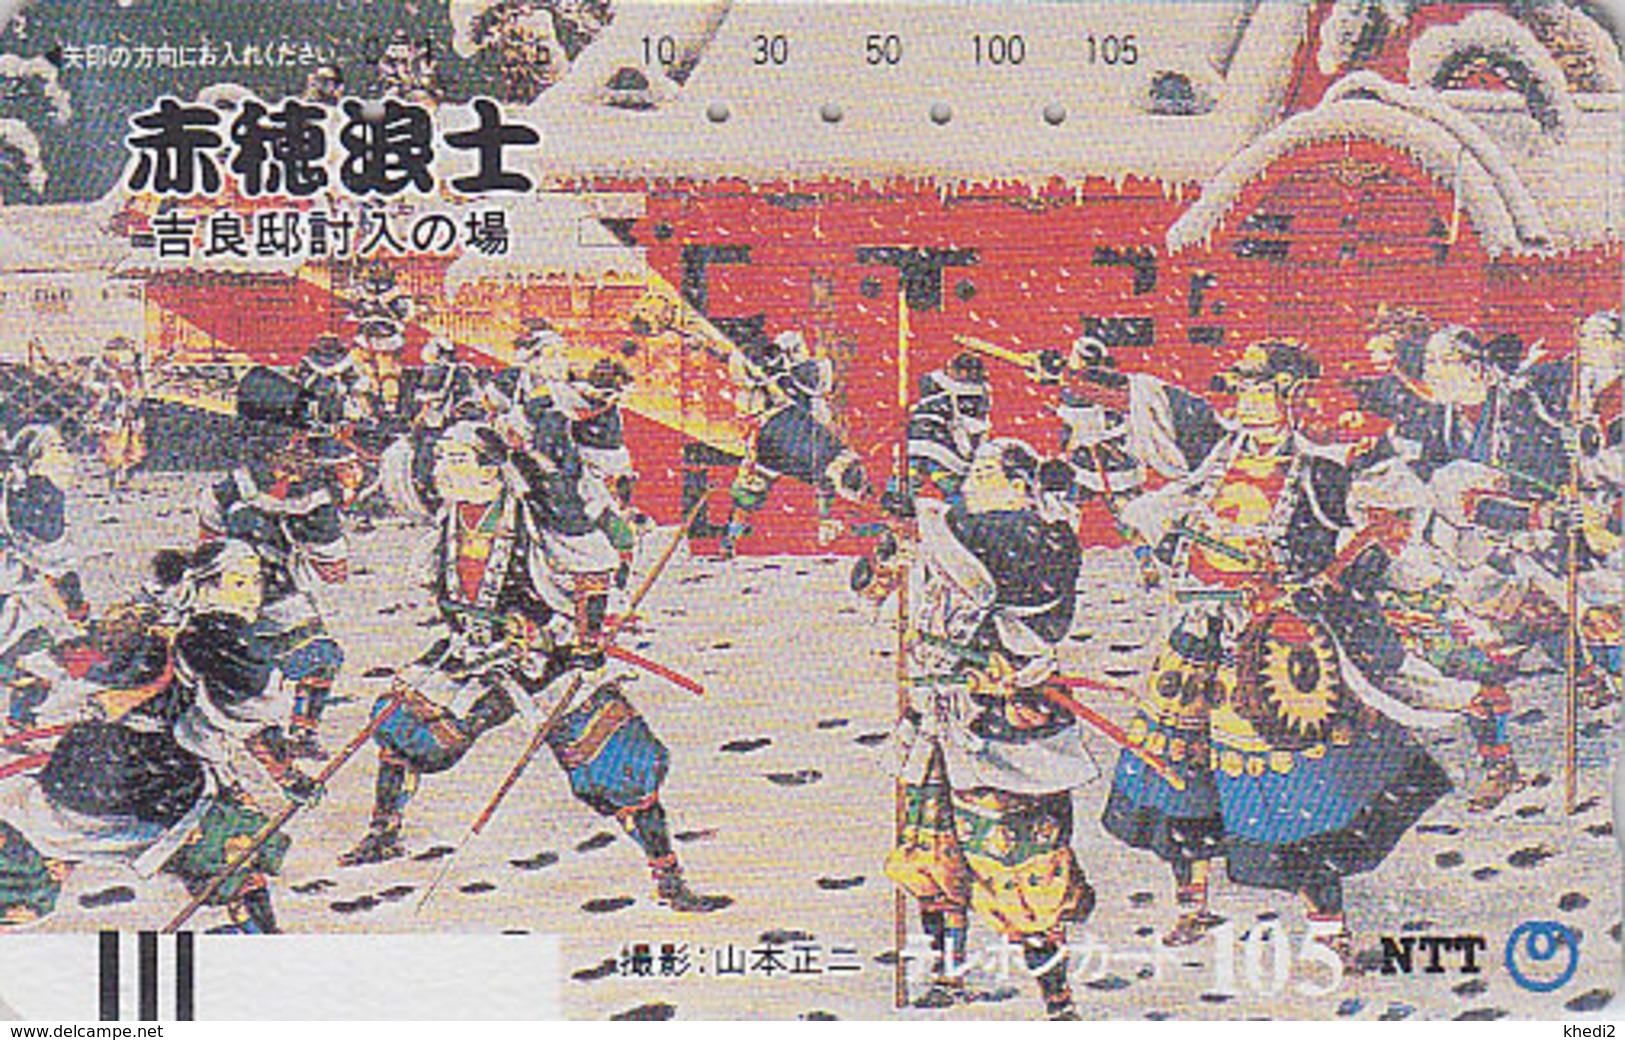 Télécarte Ancienne Japon / NTT 330-019 - Dessin - Tradition / Guerriers - Warriors Painting Japan Front Bar Phonecard - Giappone